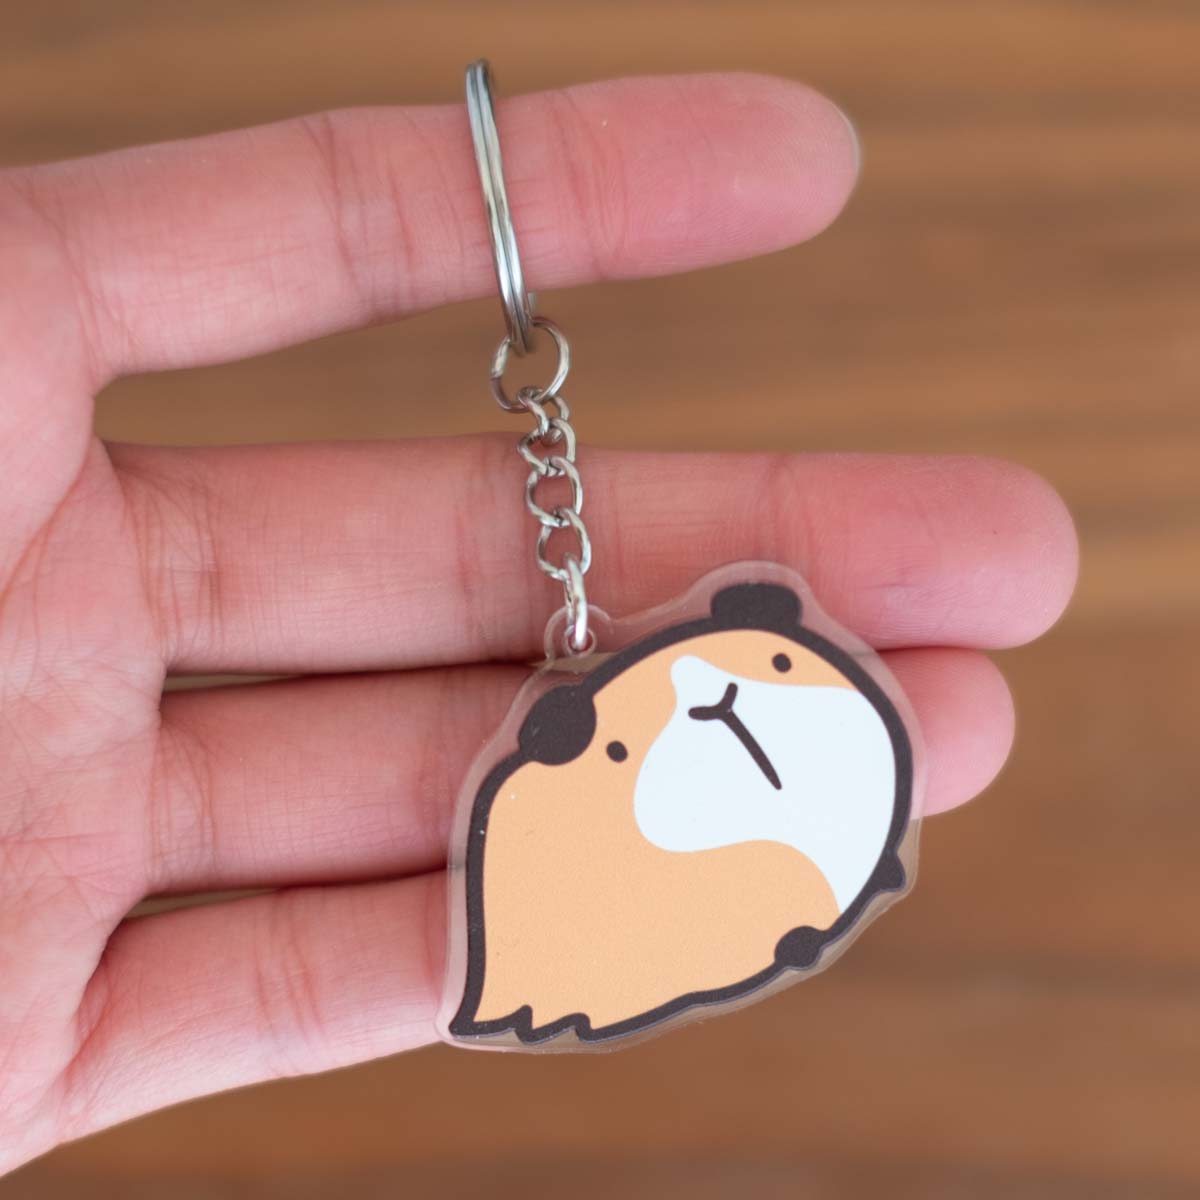 Keychain - PP Guinea pig, brown & white